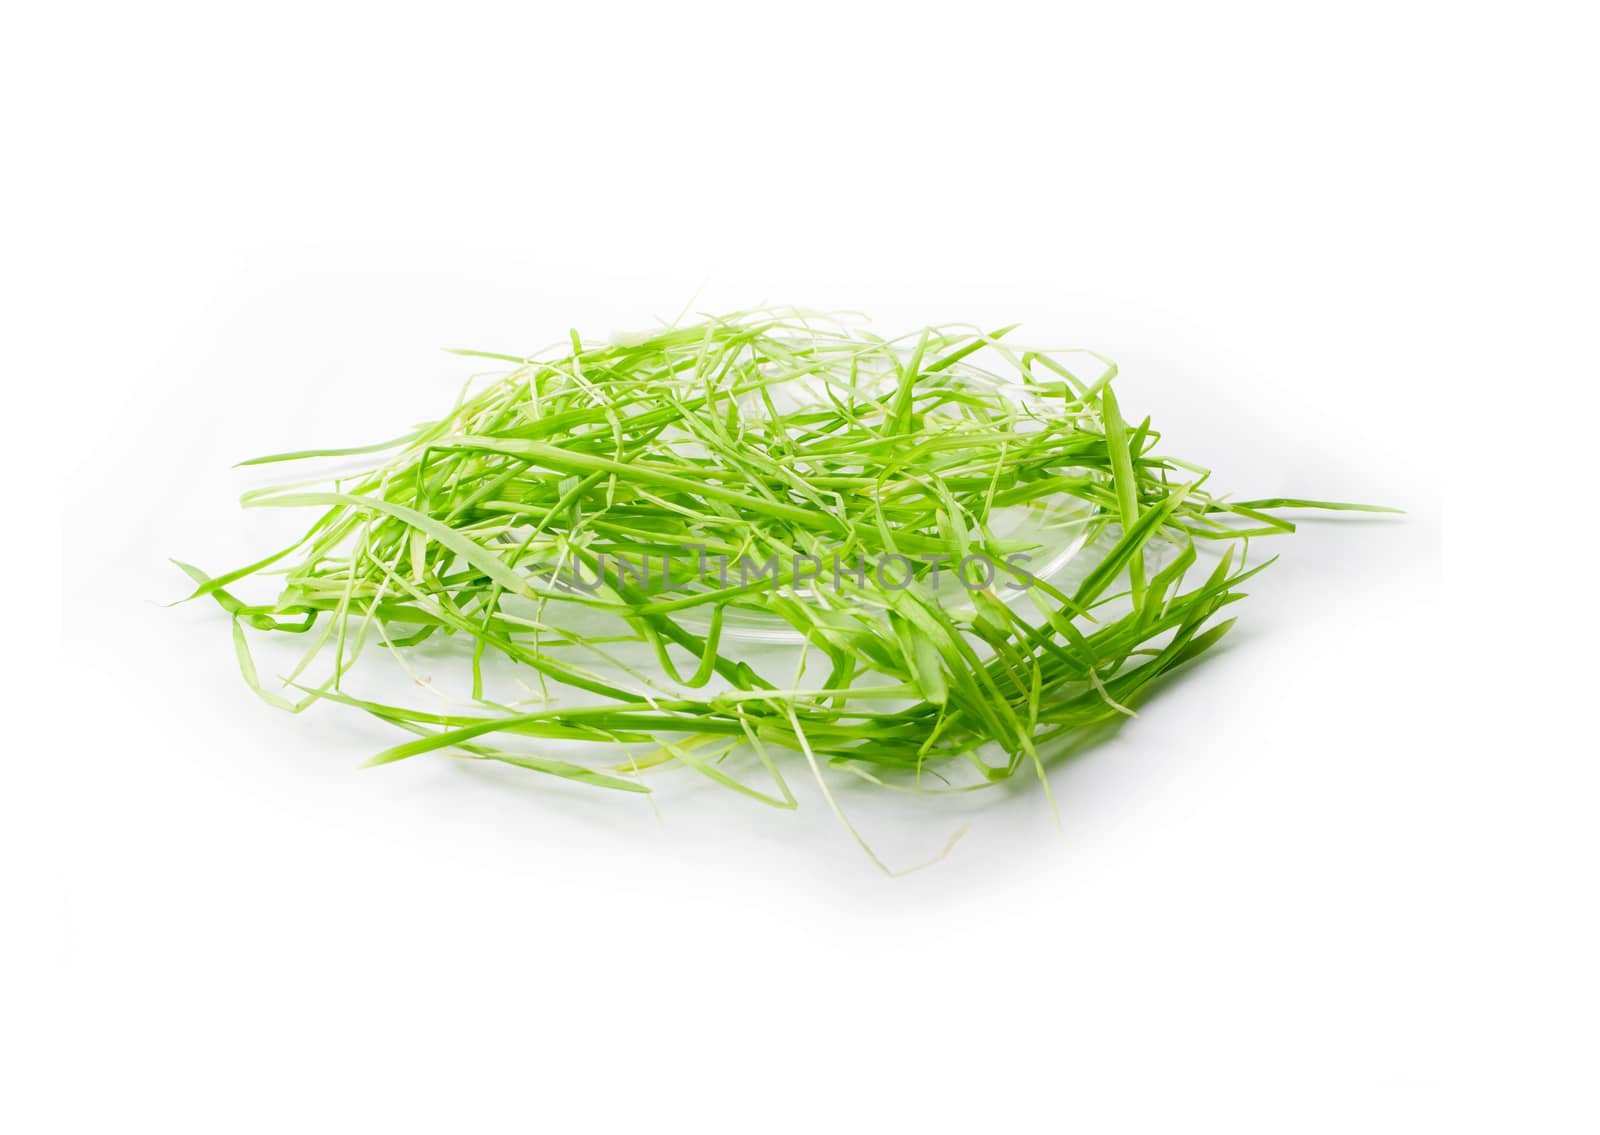 bright green grass on a white background